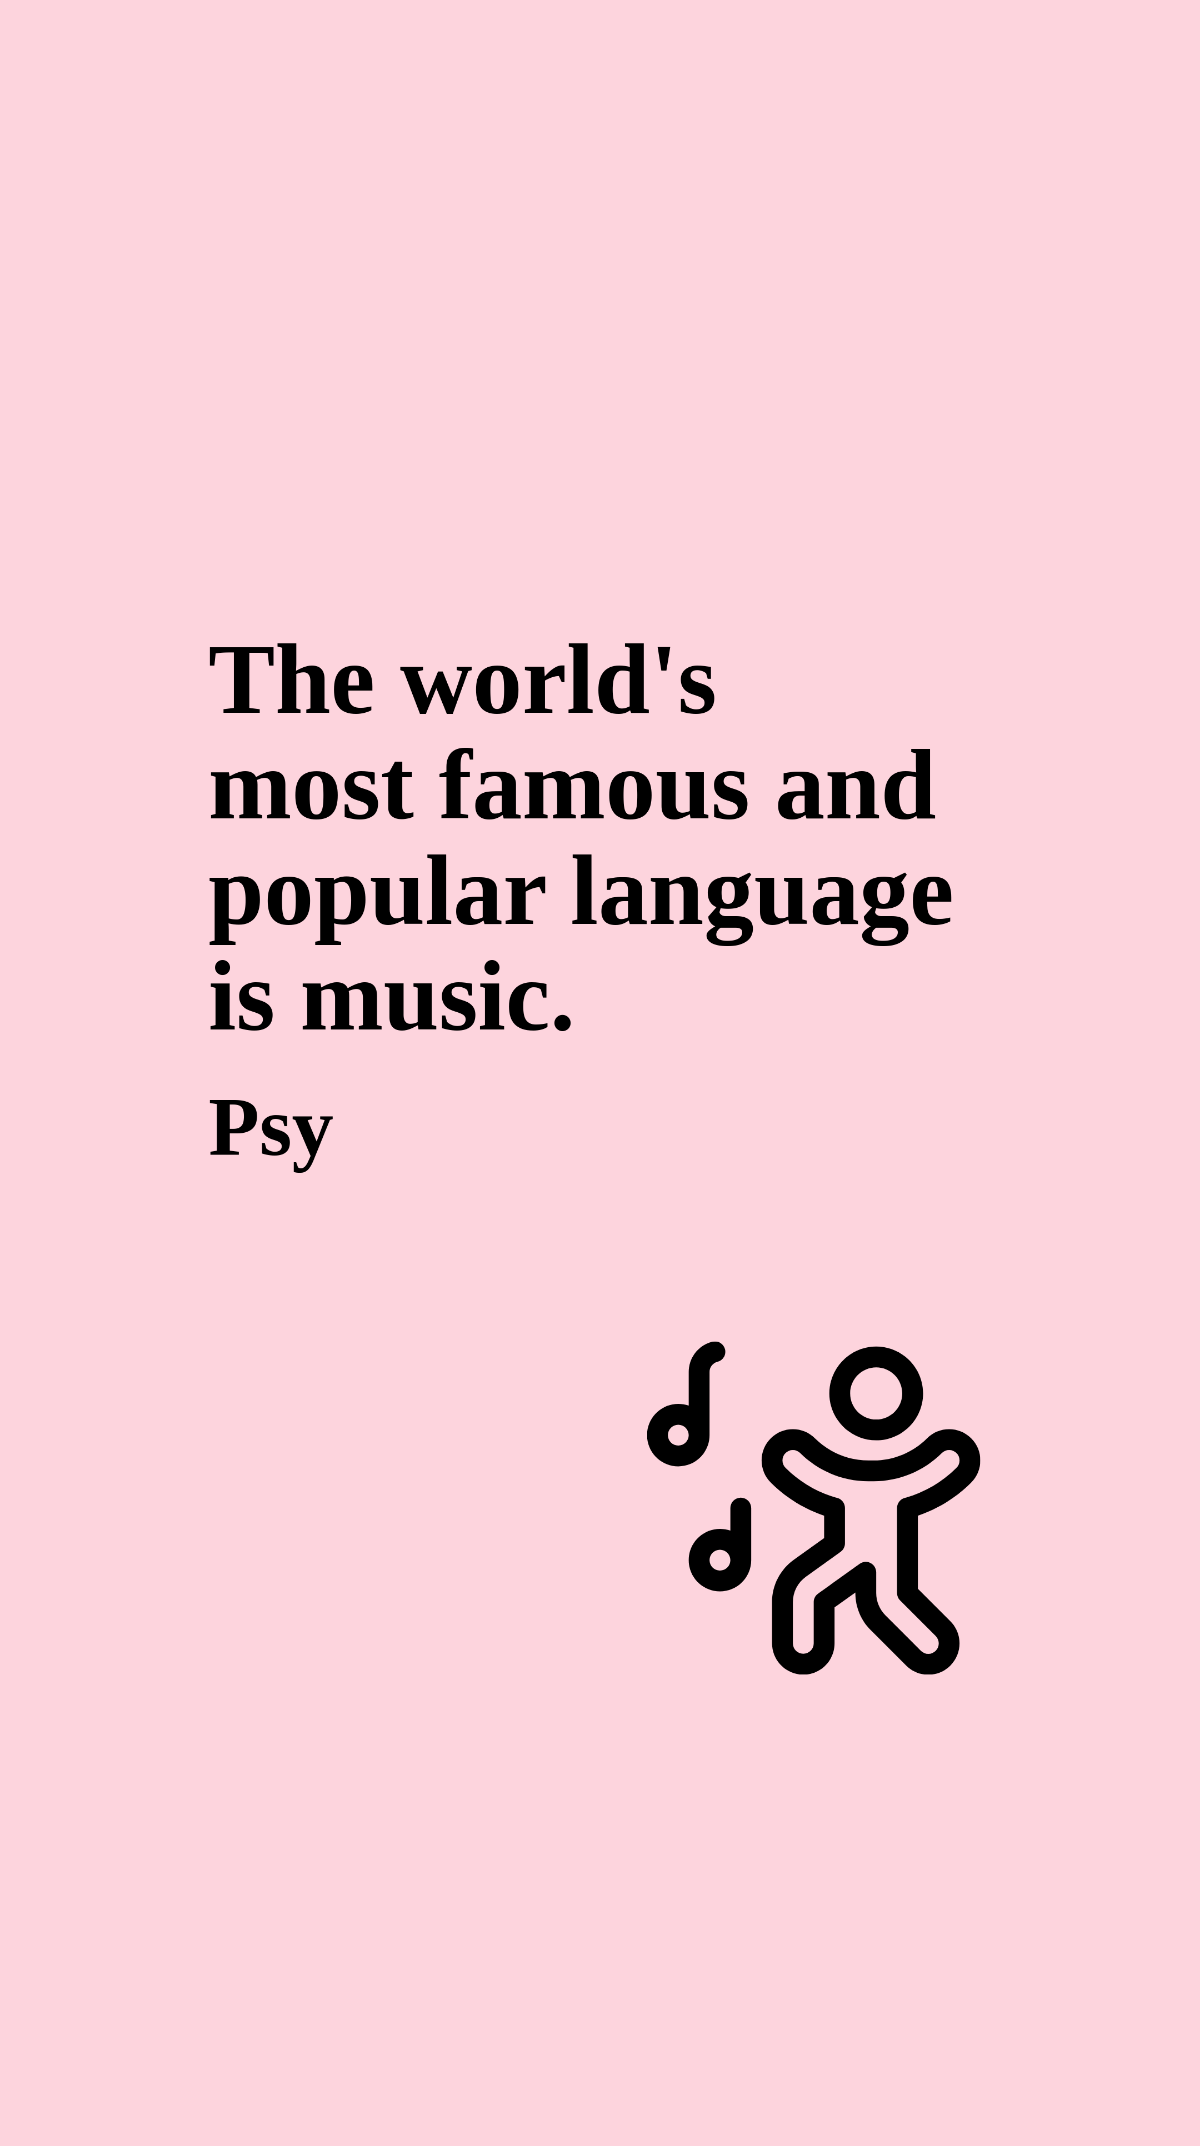 Psy - The world's most famous and popular language is music. Template